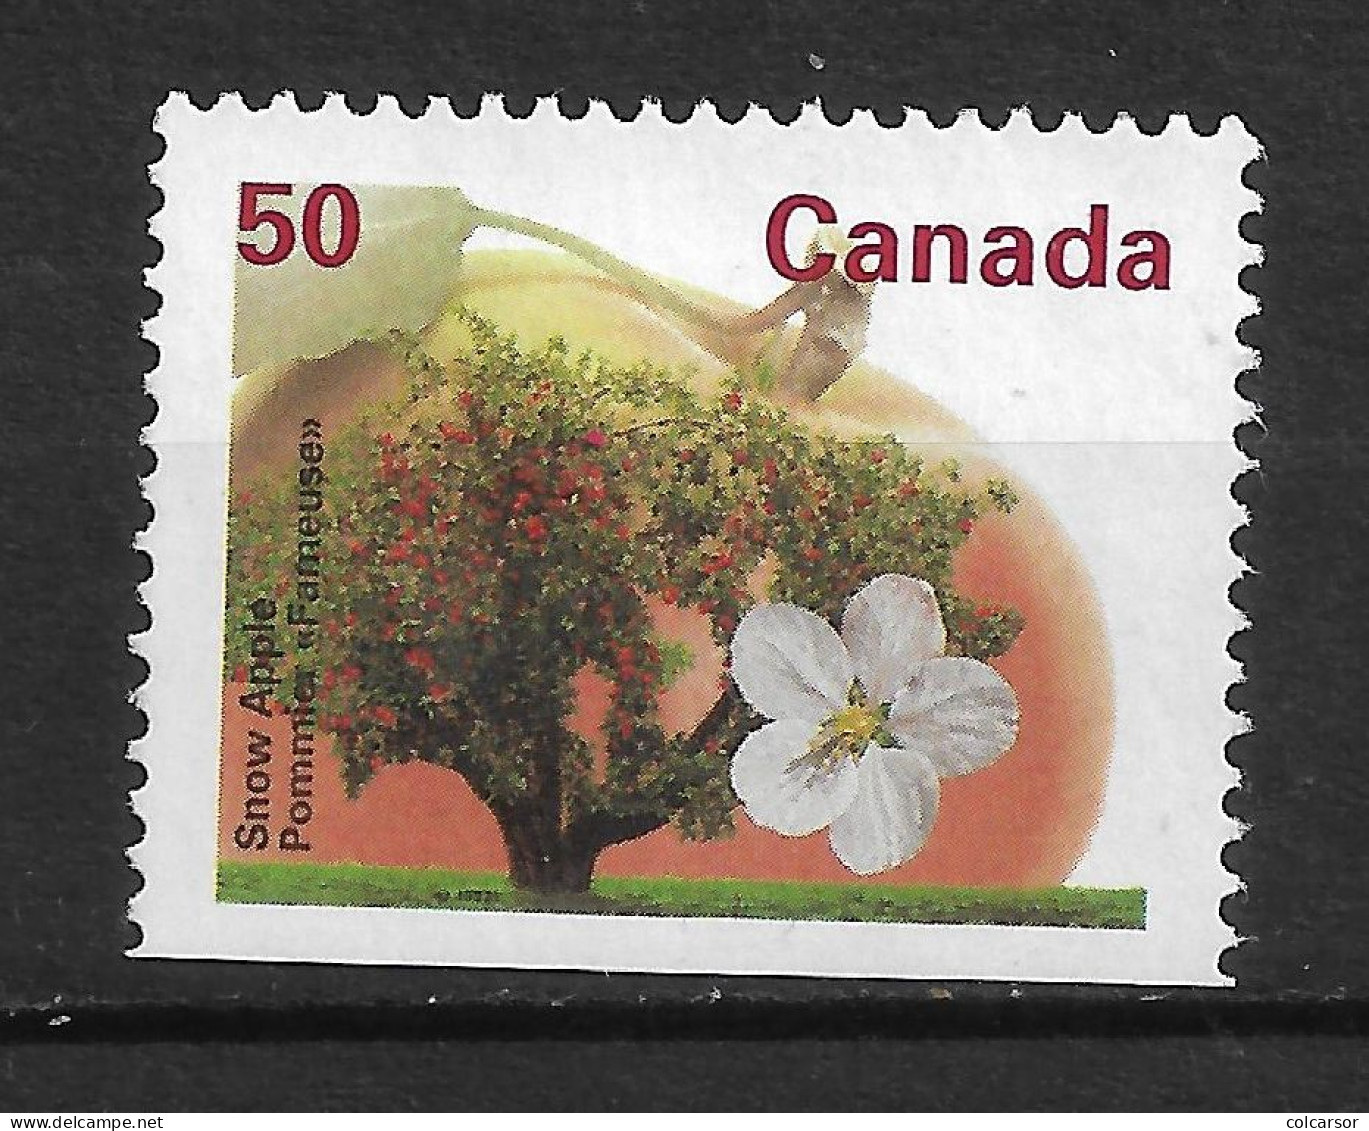 "CANADA  N°   1356A - Used Stamps